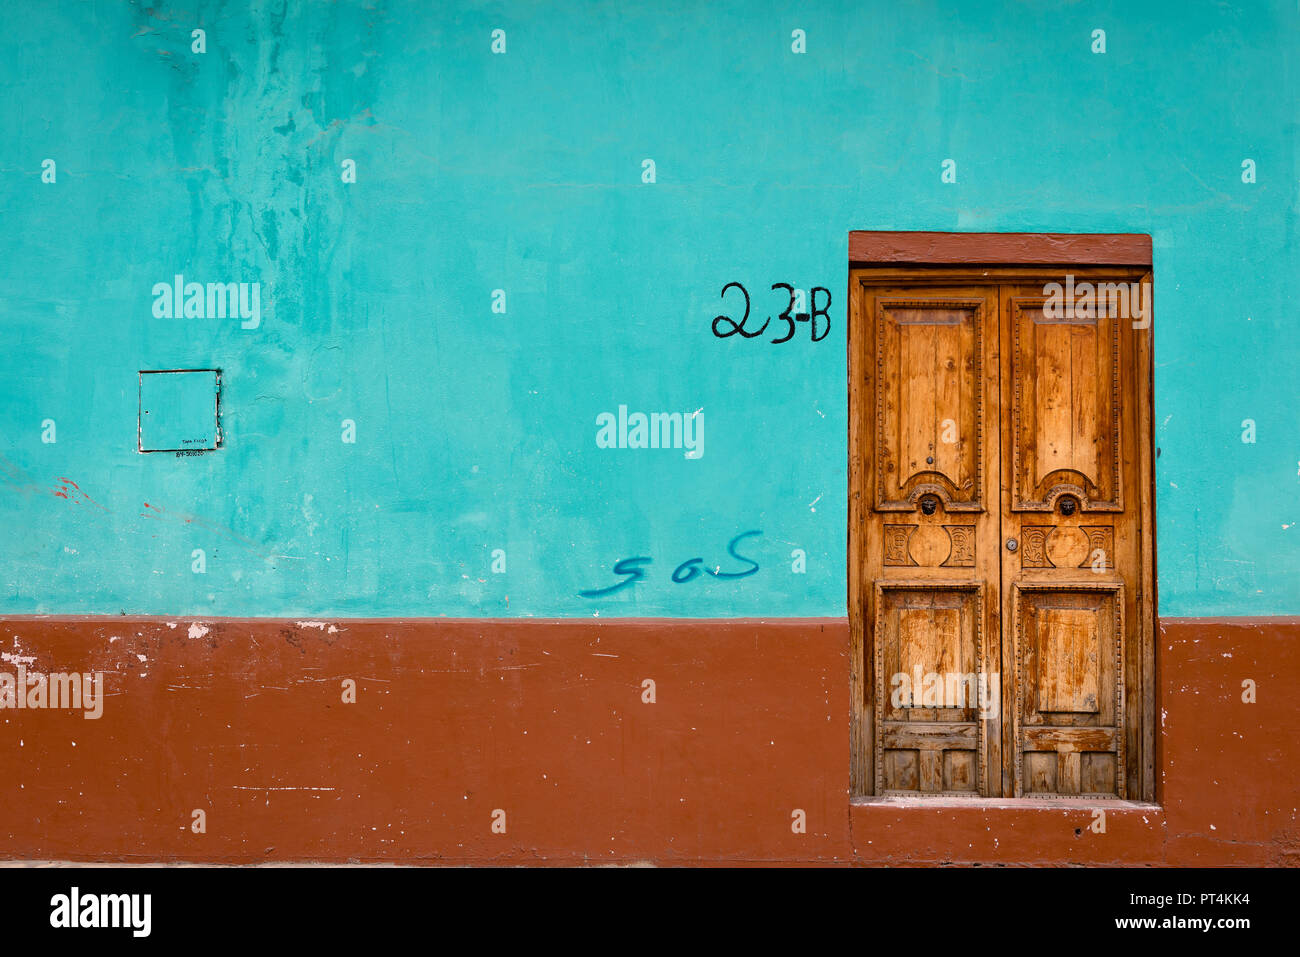 Ornate wooden door and colourful wall of a colonial style buildingin San Christobal, Mexico Stock Photo